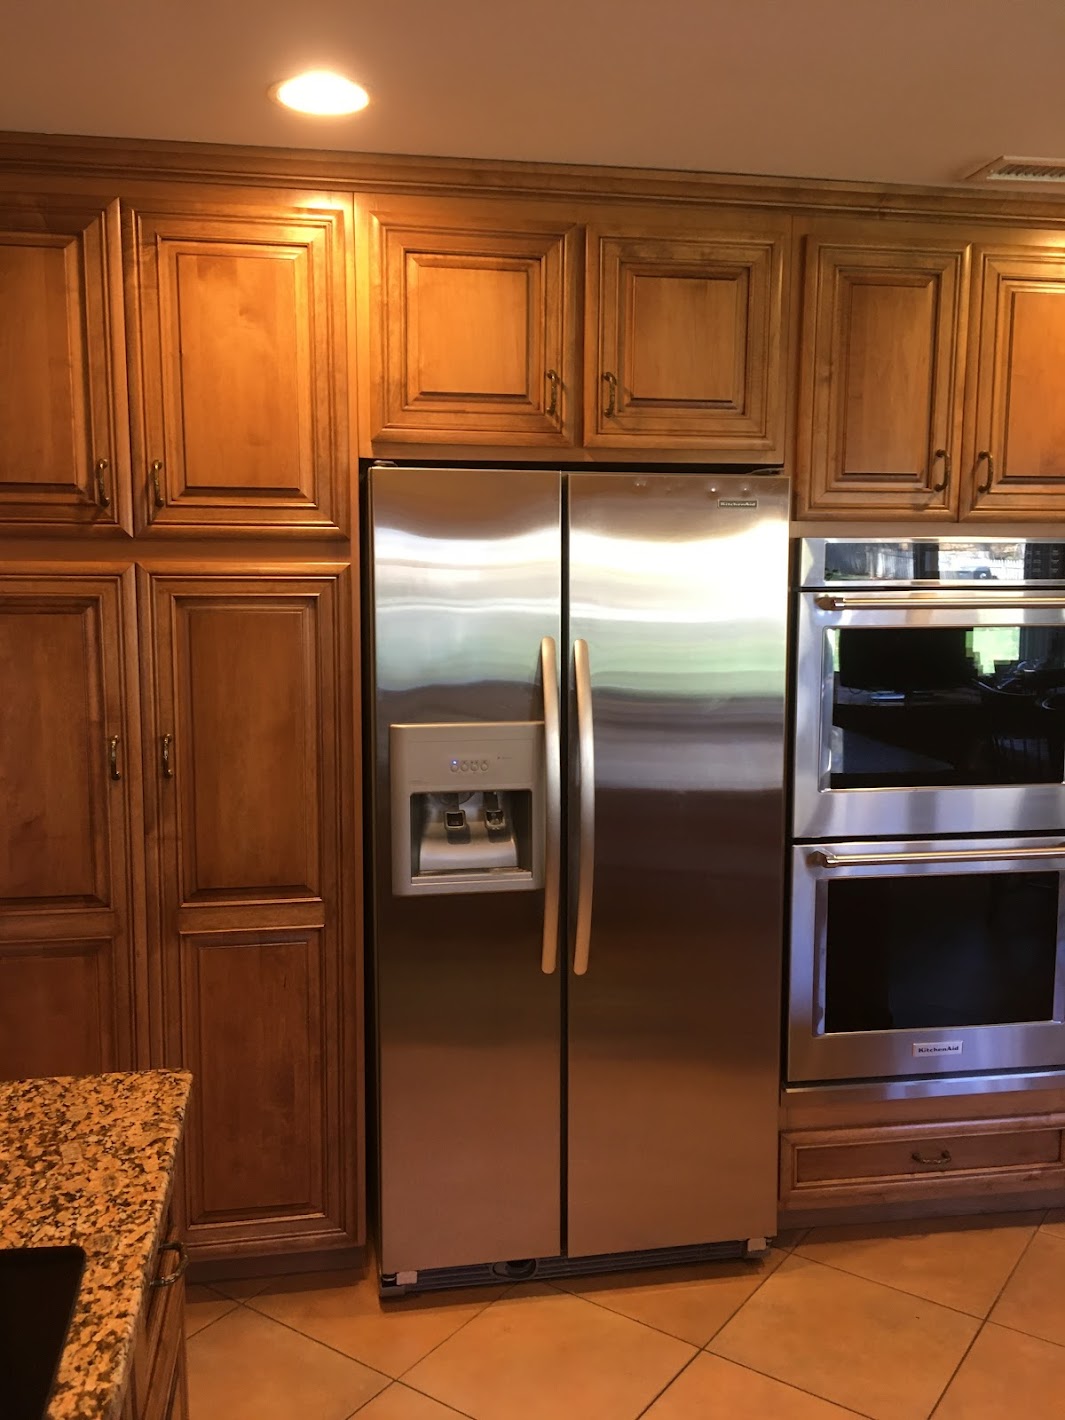 A beautiful kitchen remodel completed with maple wood with raised panel doors and matching drawers.